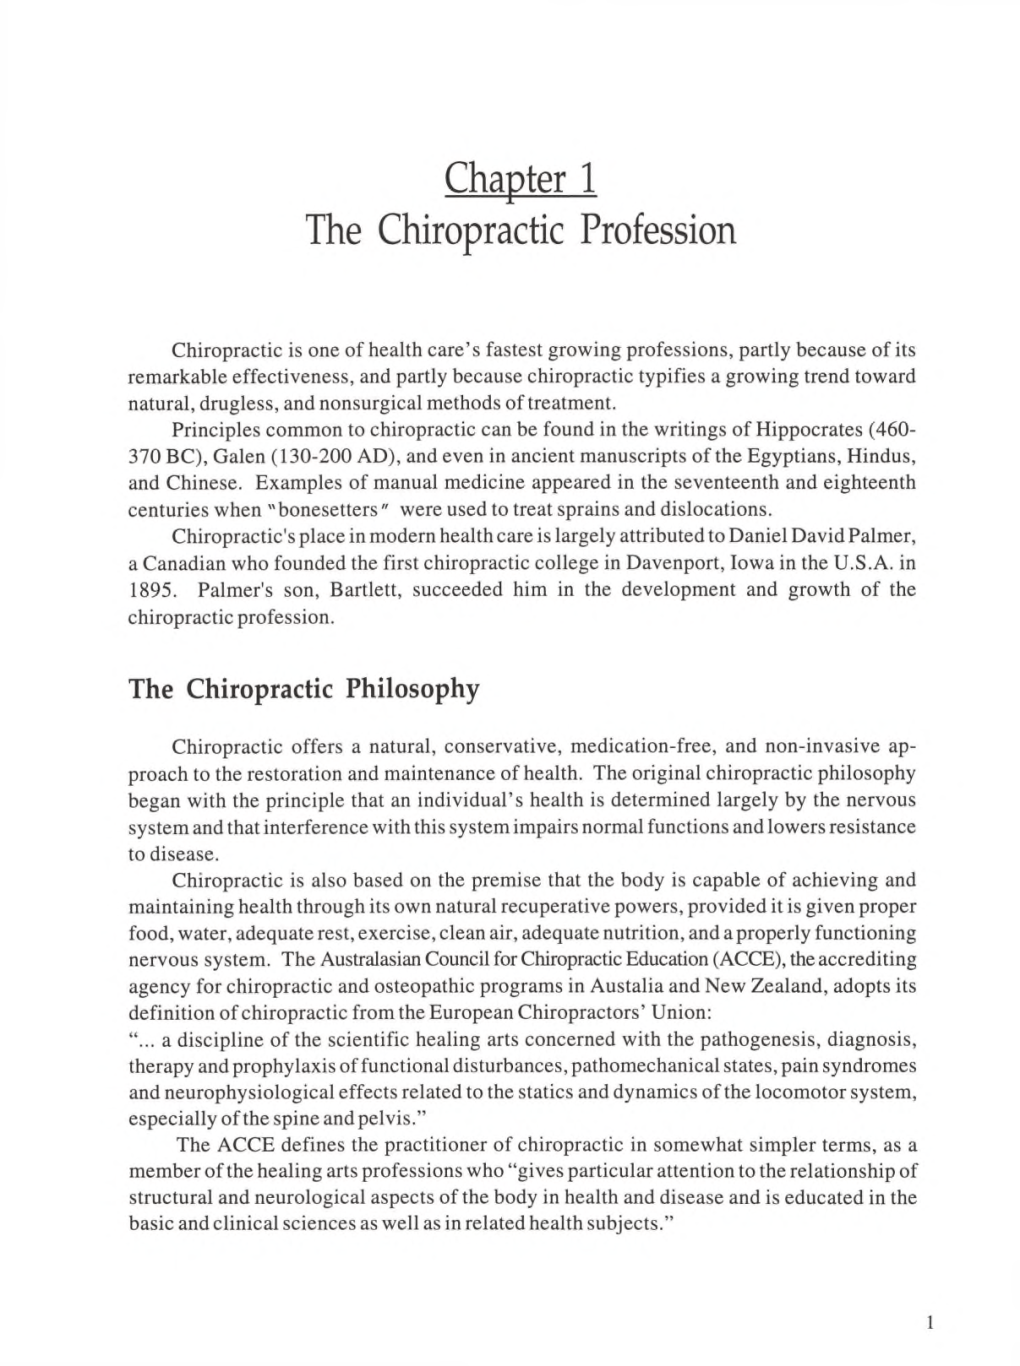 Chapter 1 the Chiropractic Profession